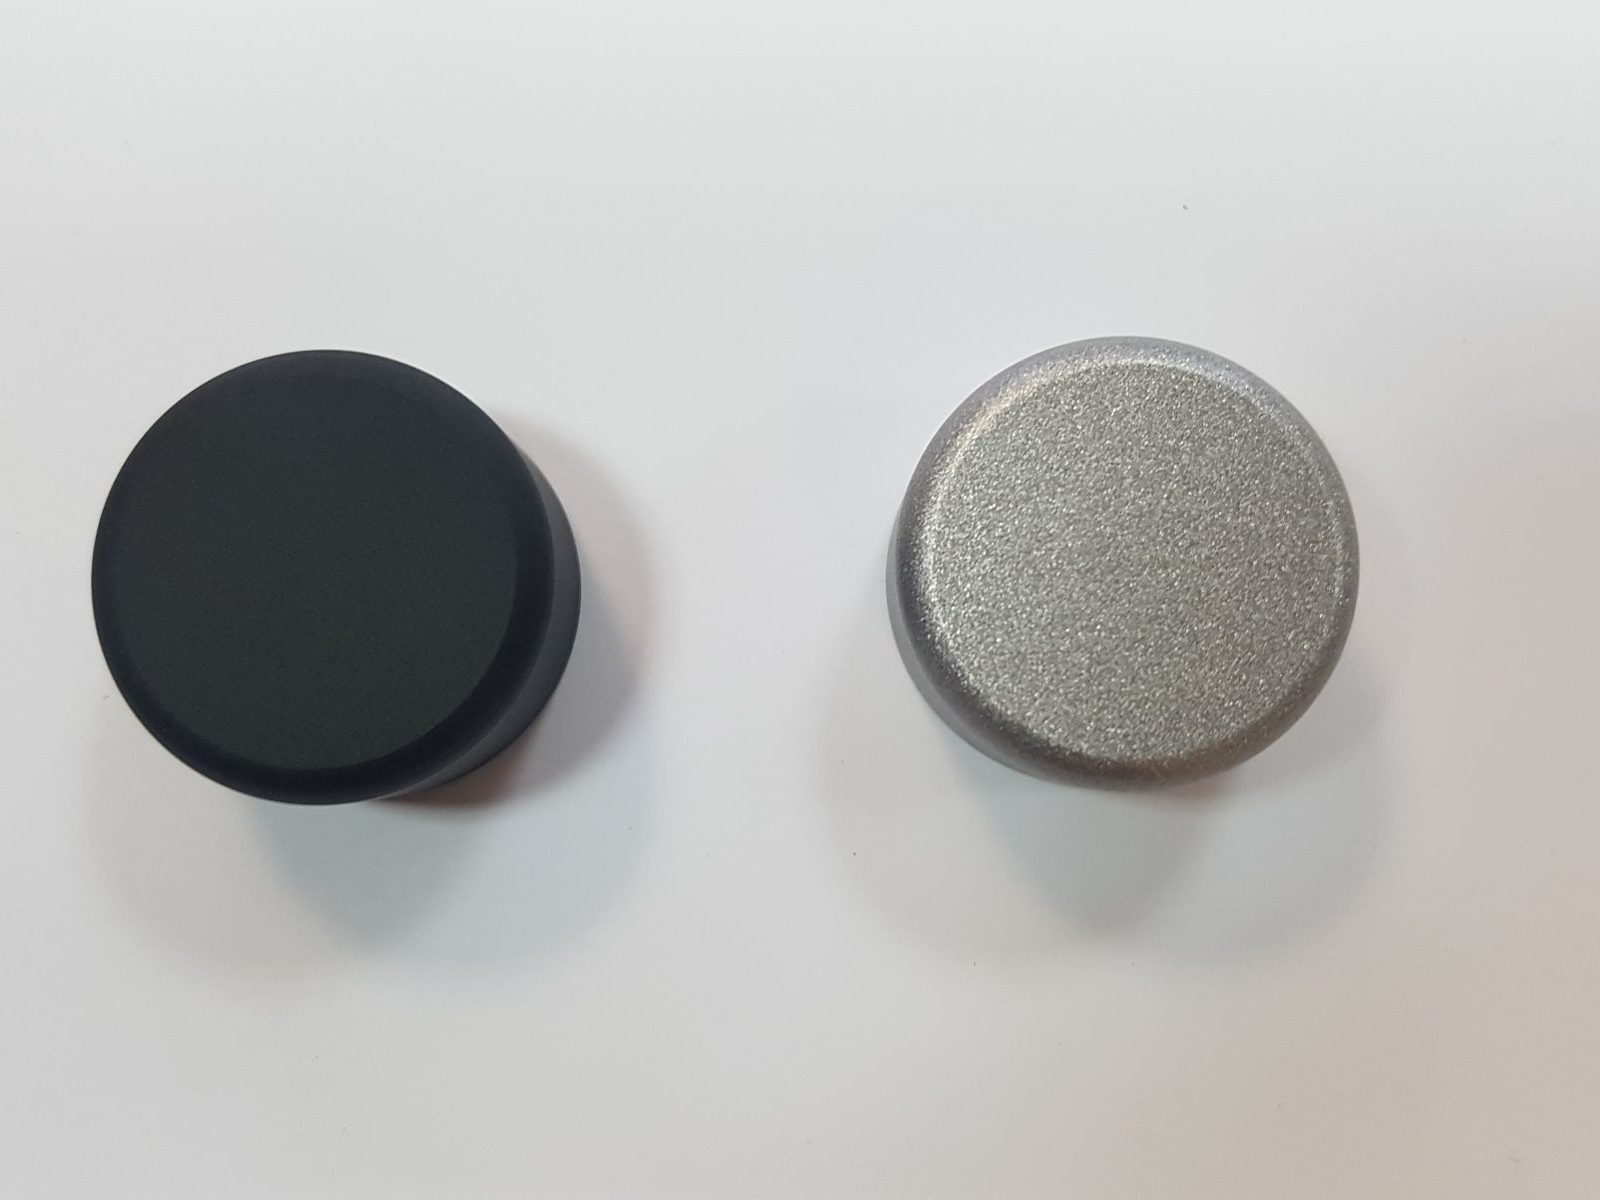 Cyrus Replacement front panel knobs